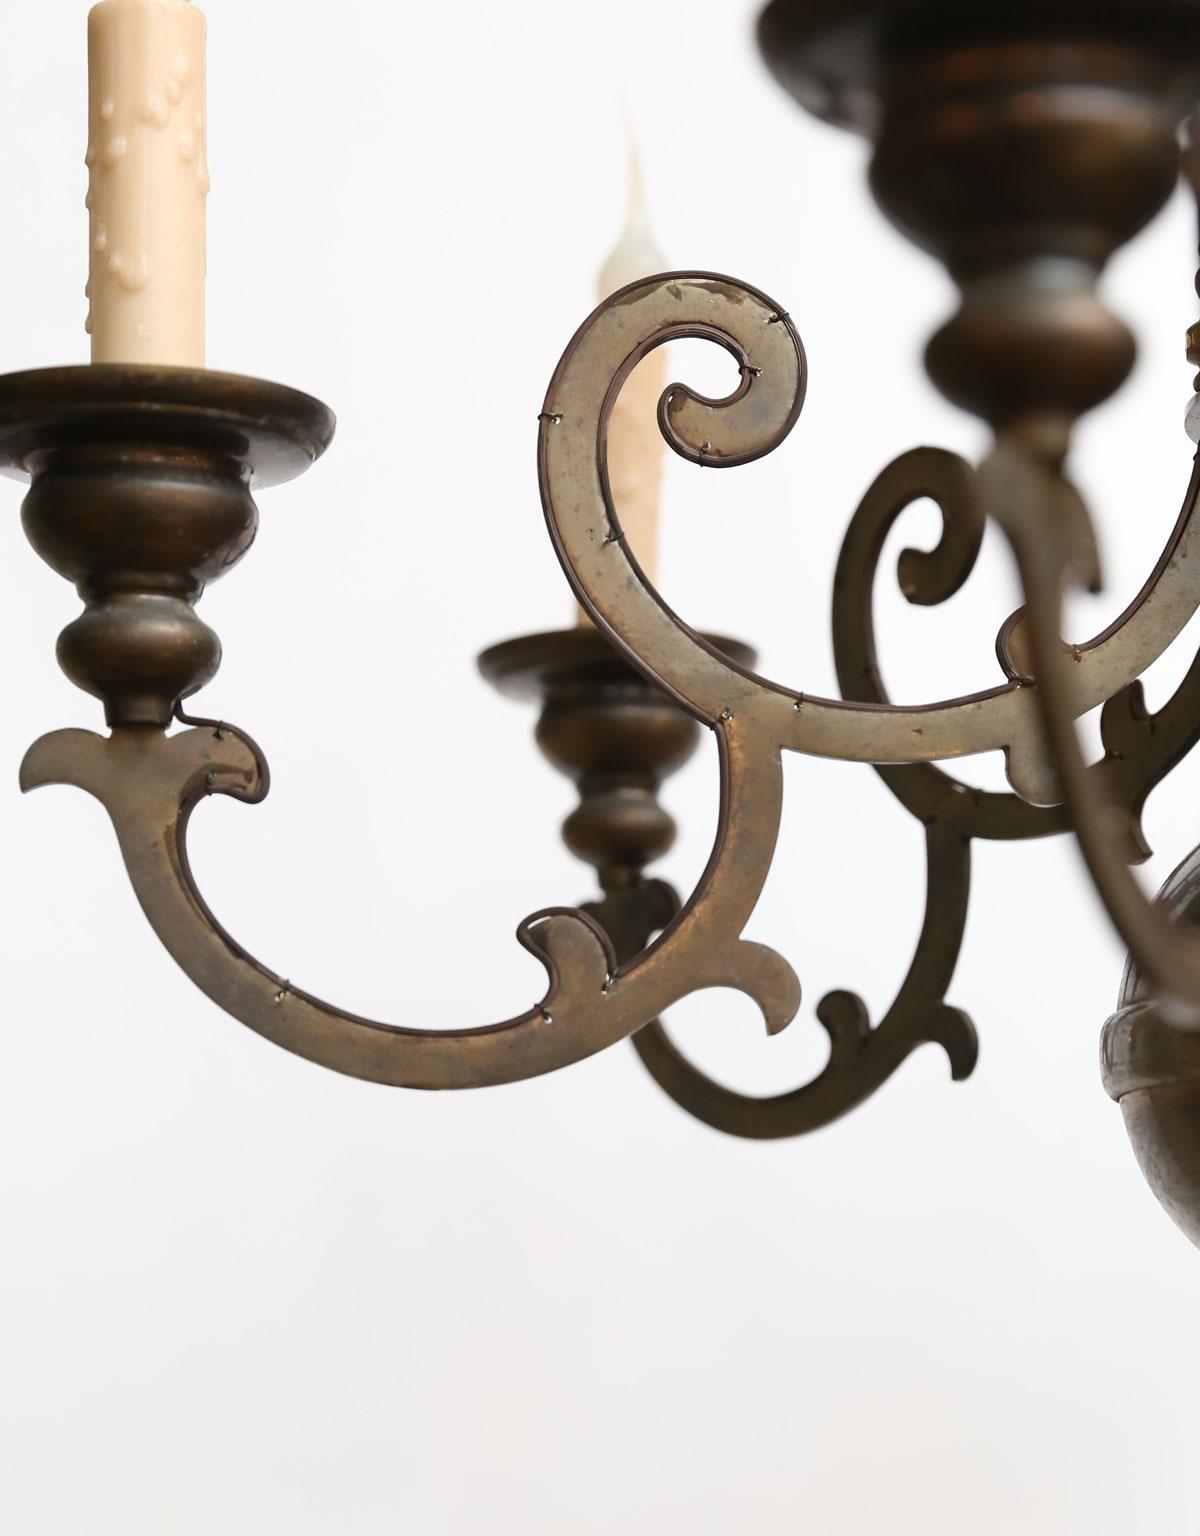 American Classical Antique Bronze Georgian-Style Chandelier with Flat Arms and Beautiful Patina